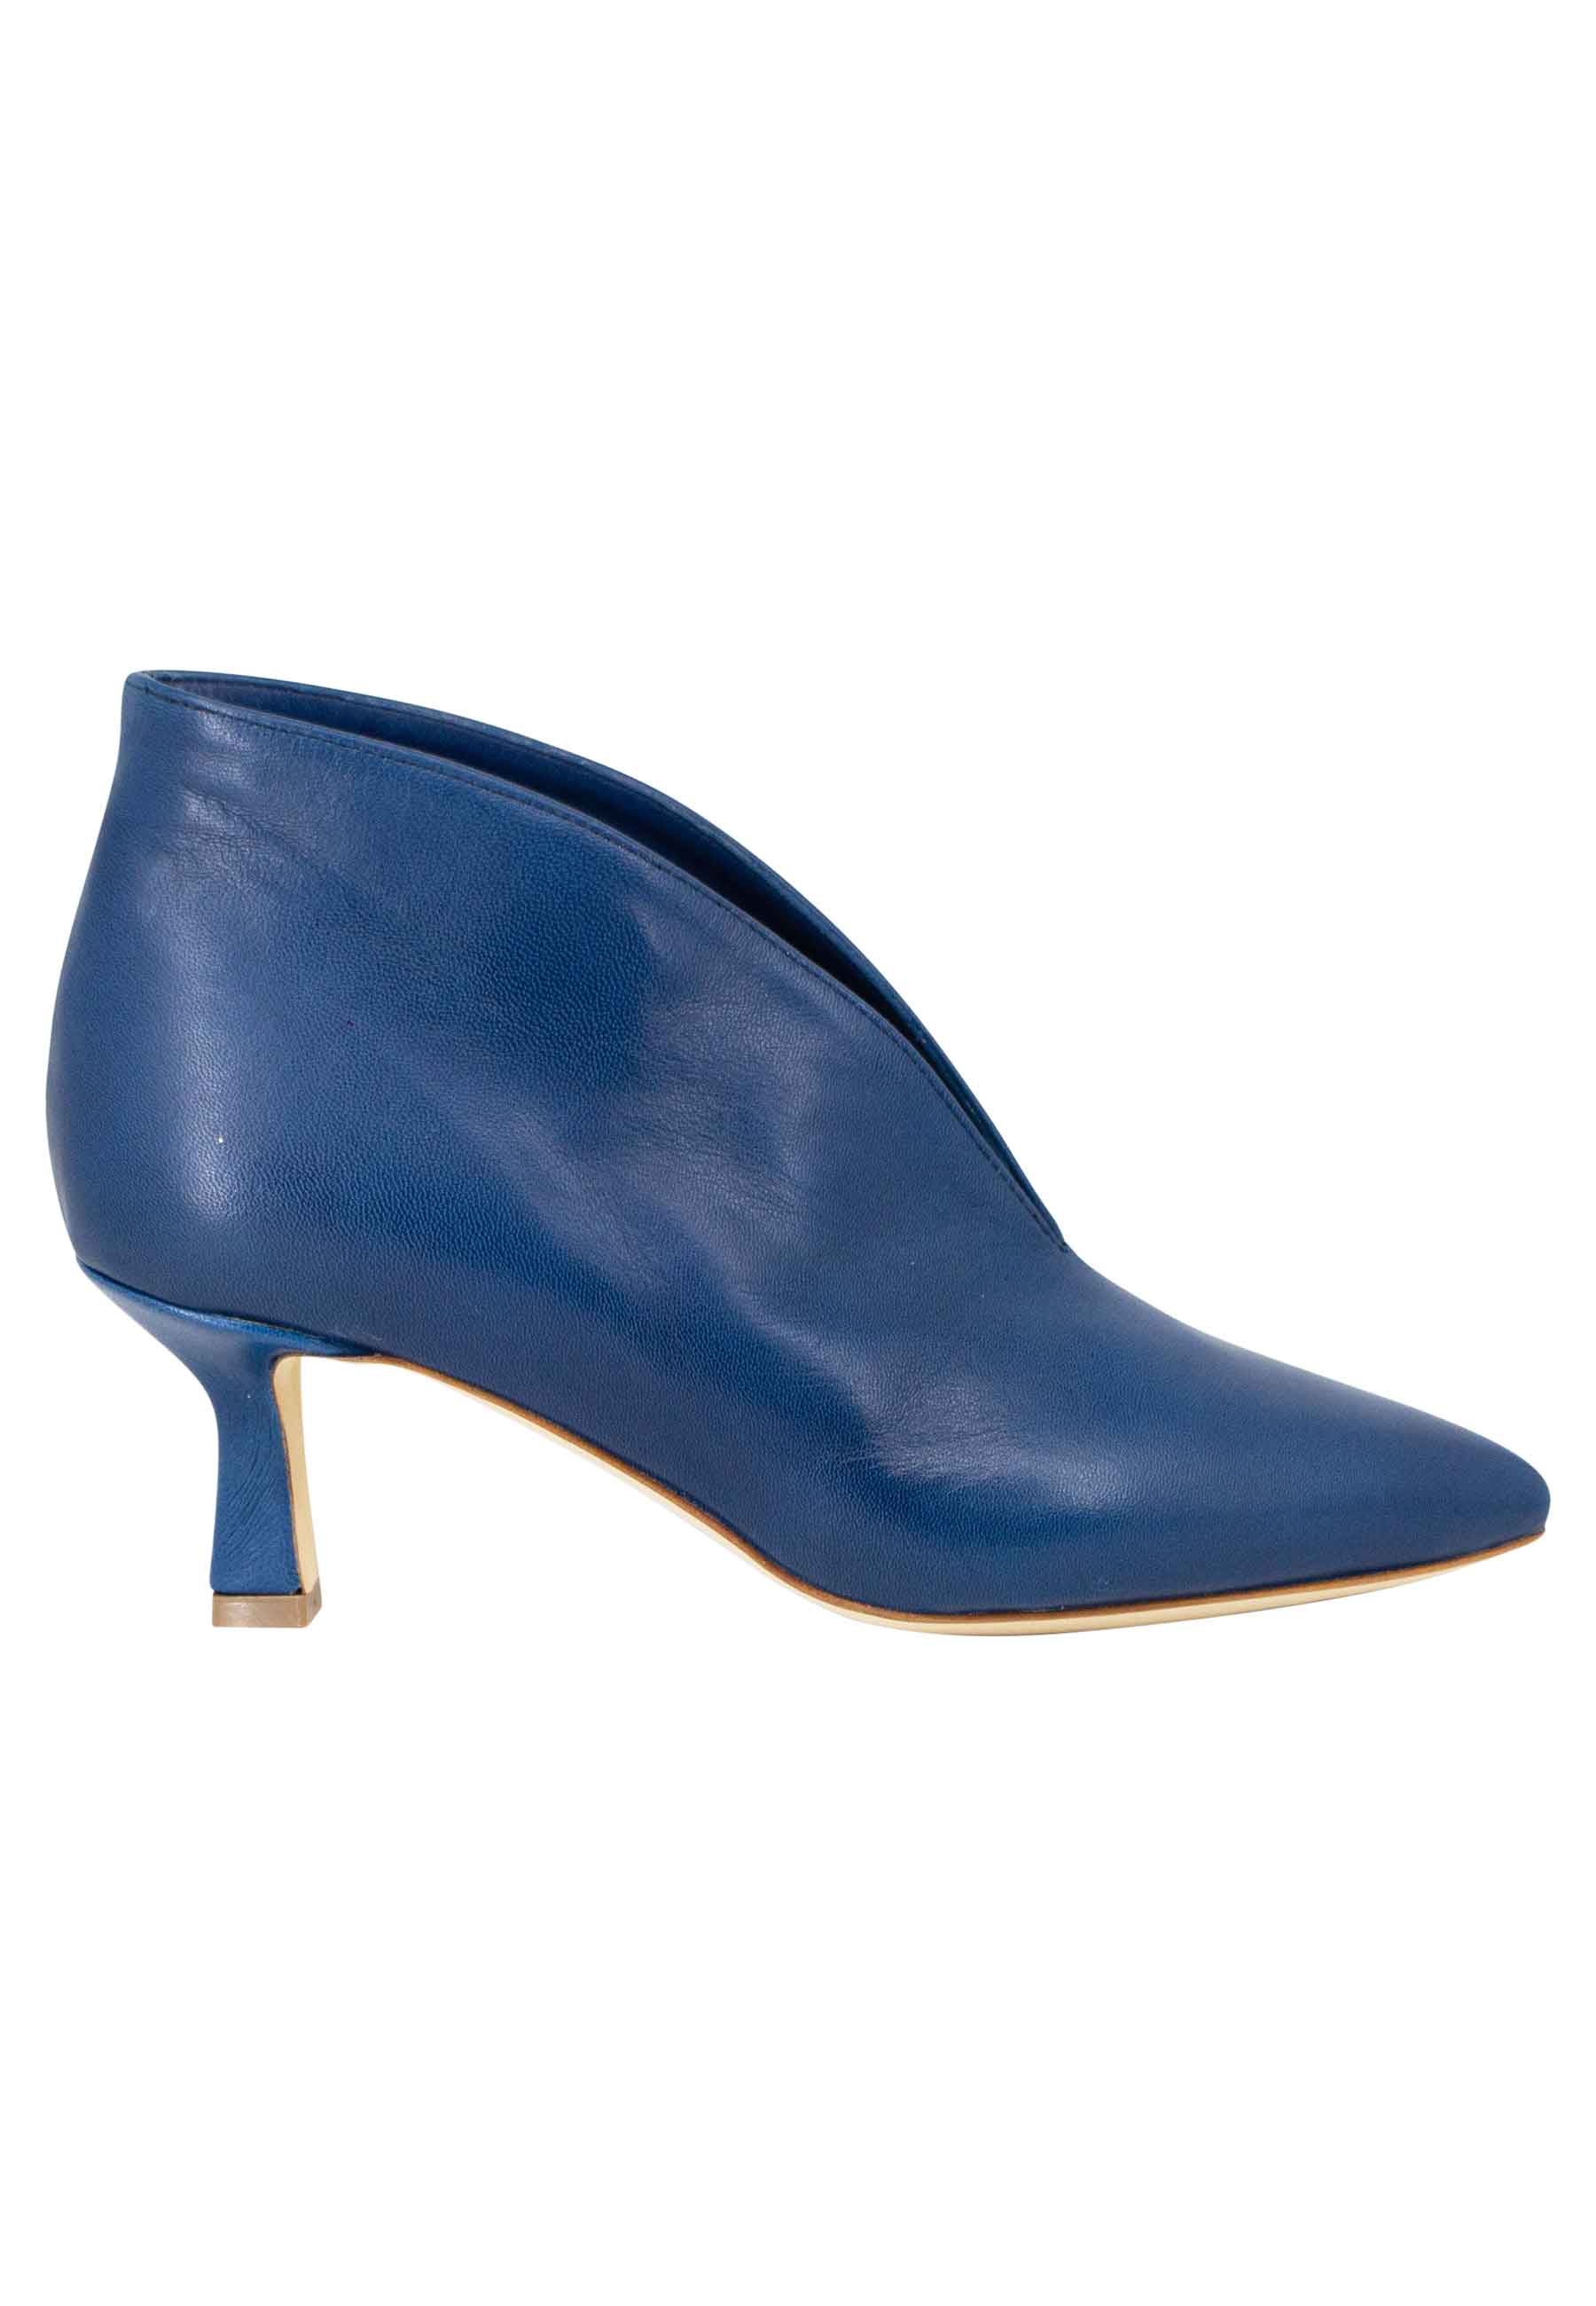 Women's Ankle boot in blue leather with low heel